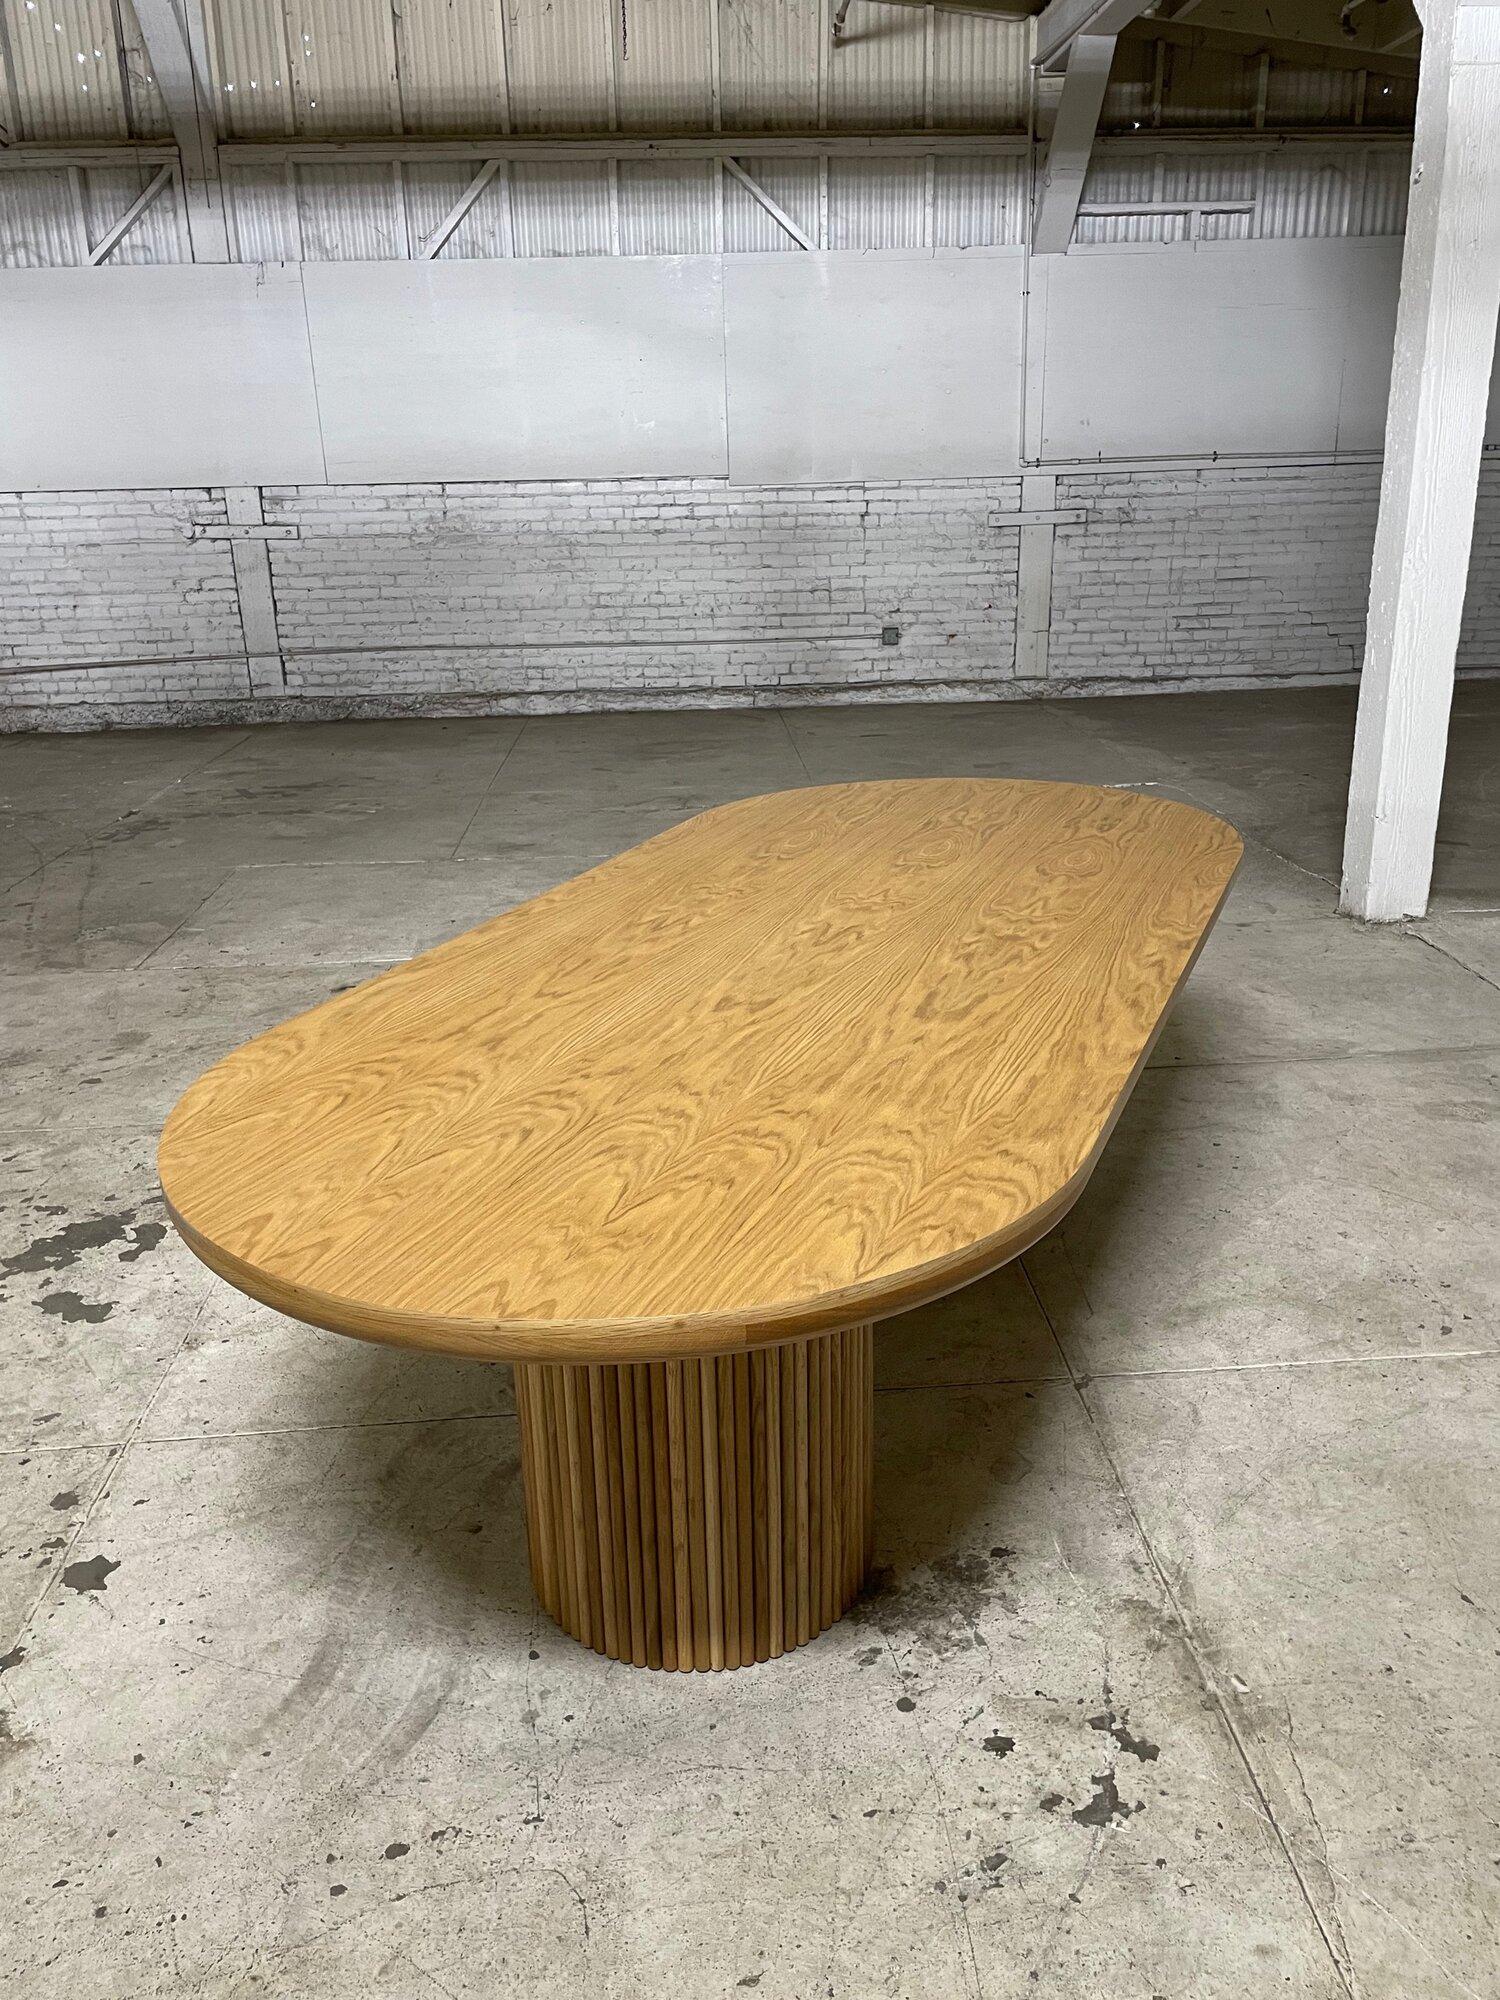 W97 D44.5 H31 Knee Clearance 28.5

Fully custom made rift white oak dining table with a race track table top that flows along the edge. The grain along the top is spectacular, since these are organic cuts of wood and each table is made upon order